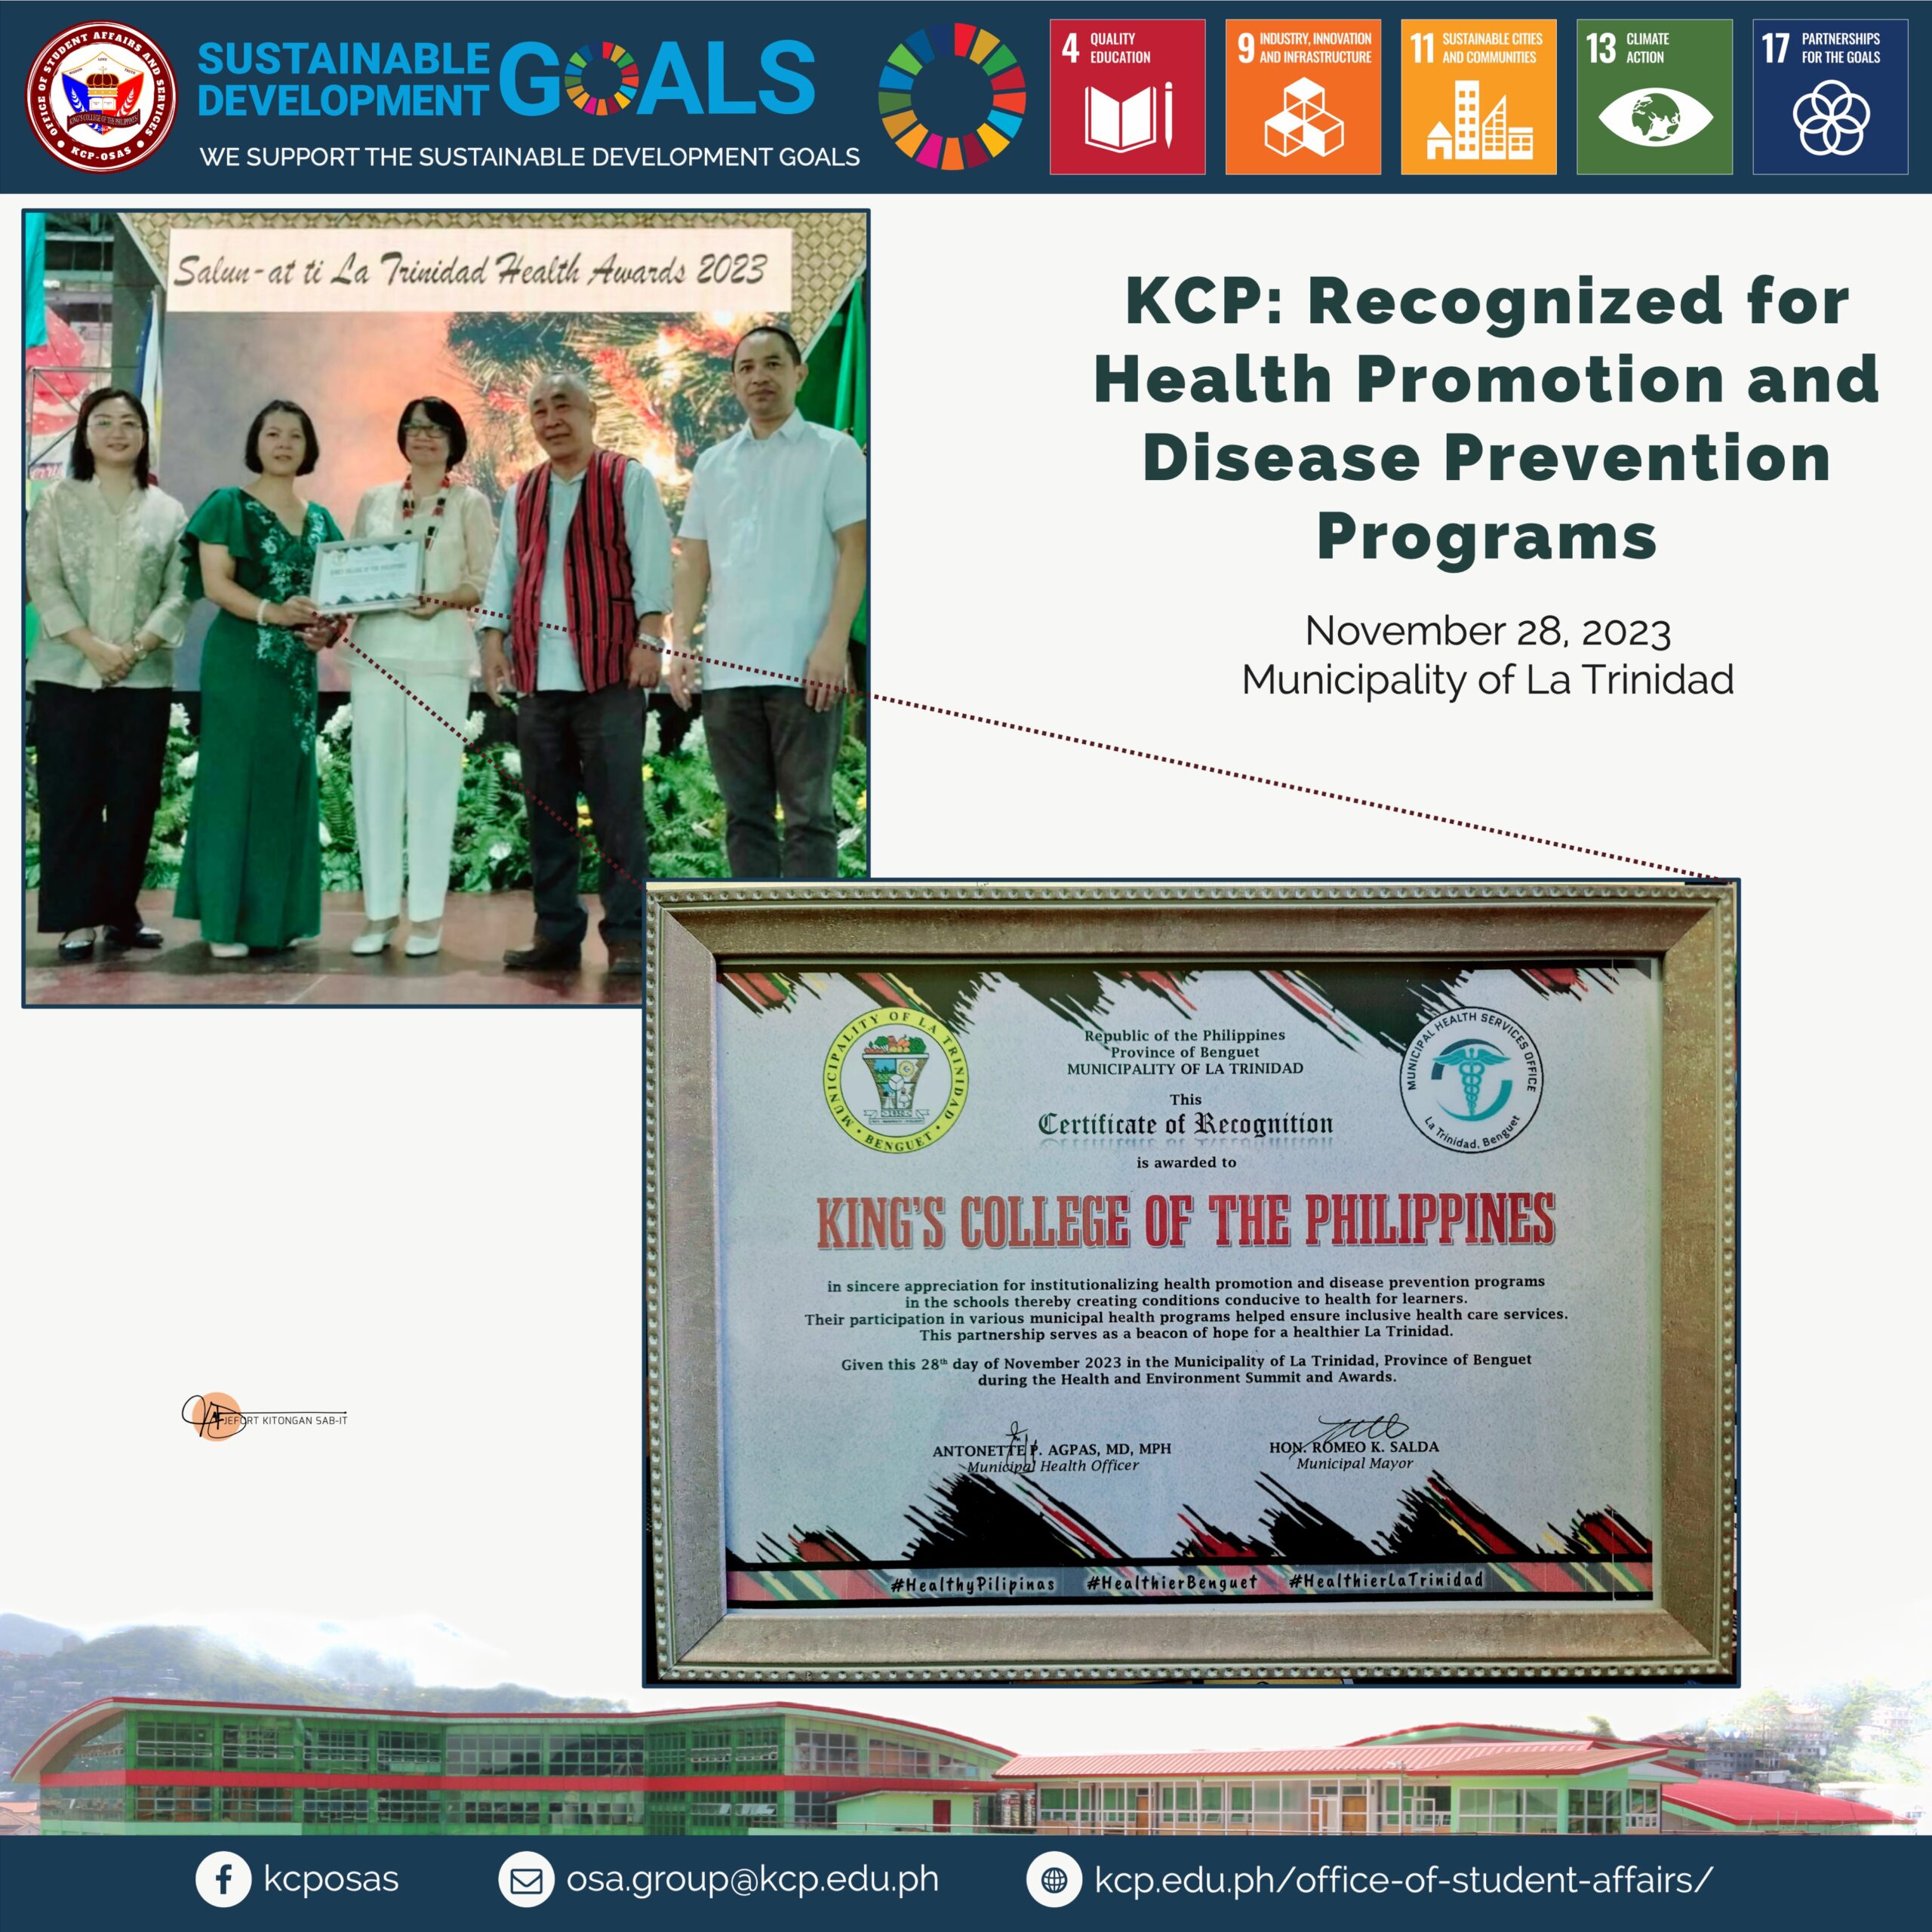 KCP: Recognized for Health Promotion and Disease Prevention Programs